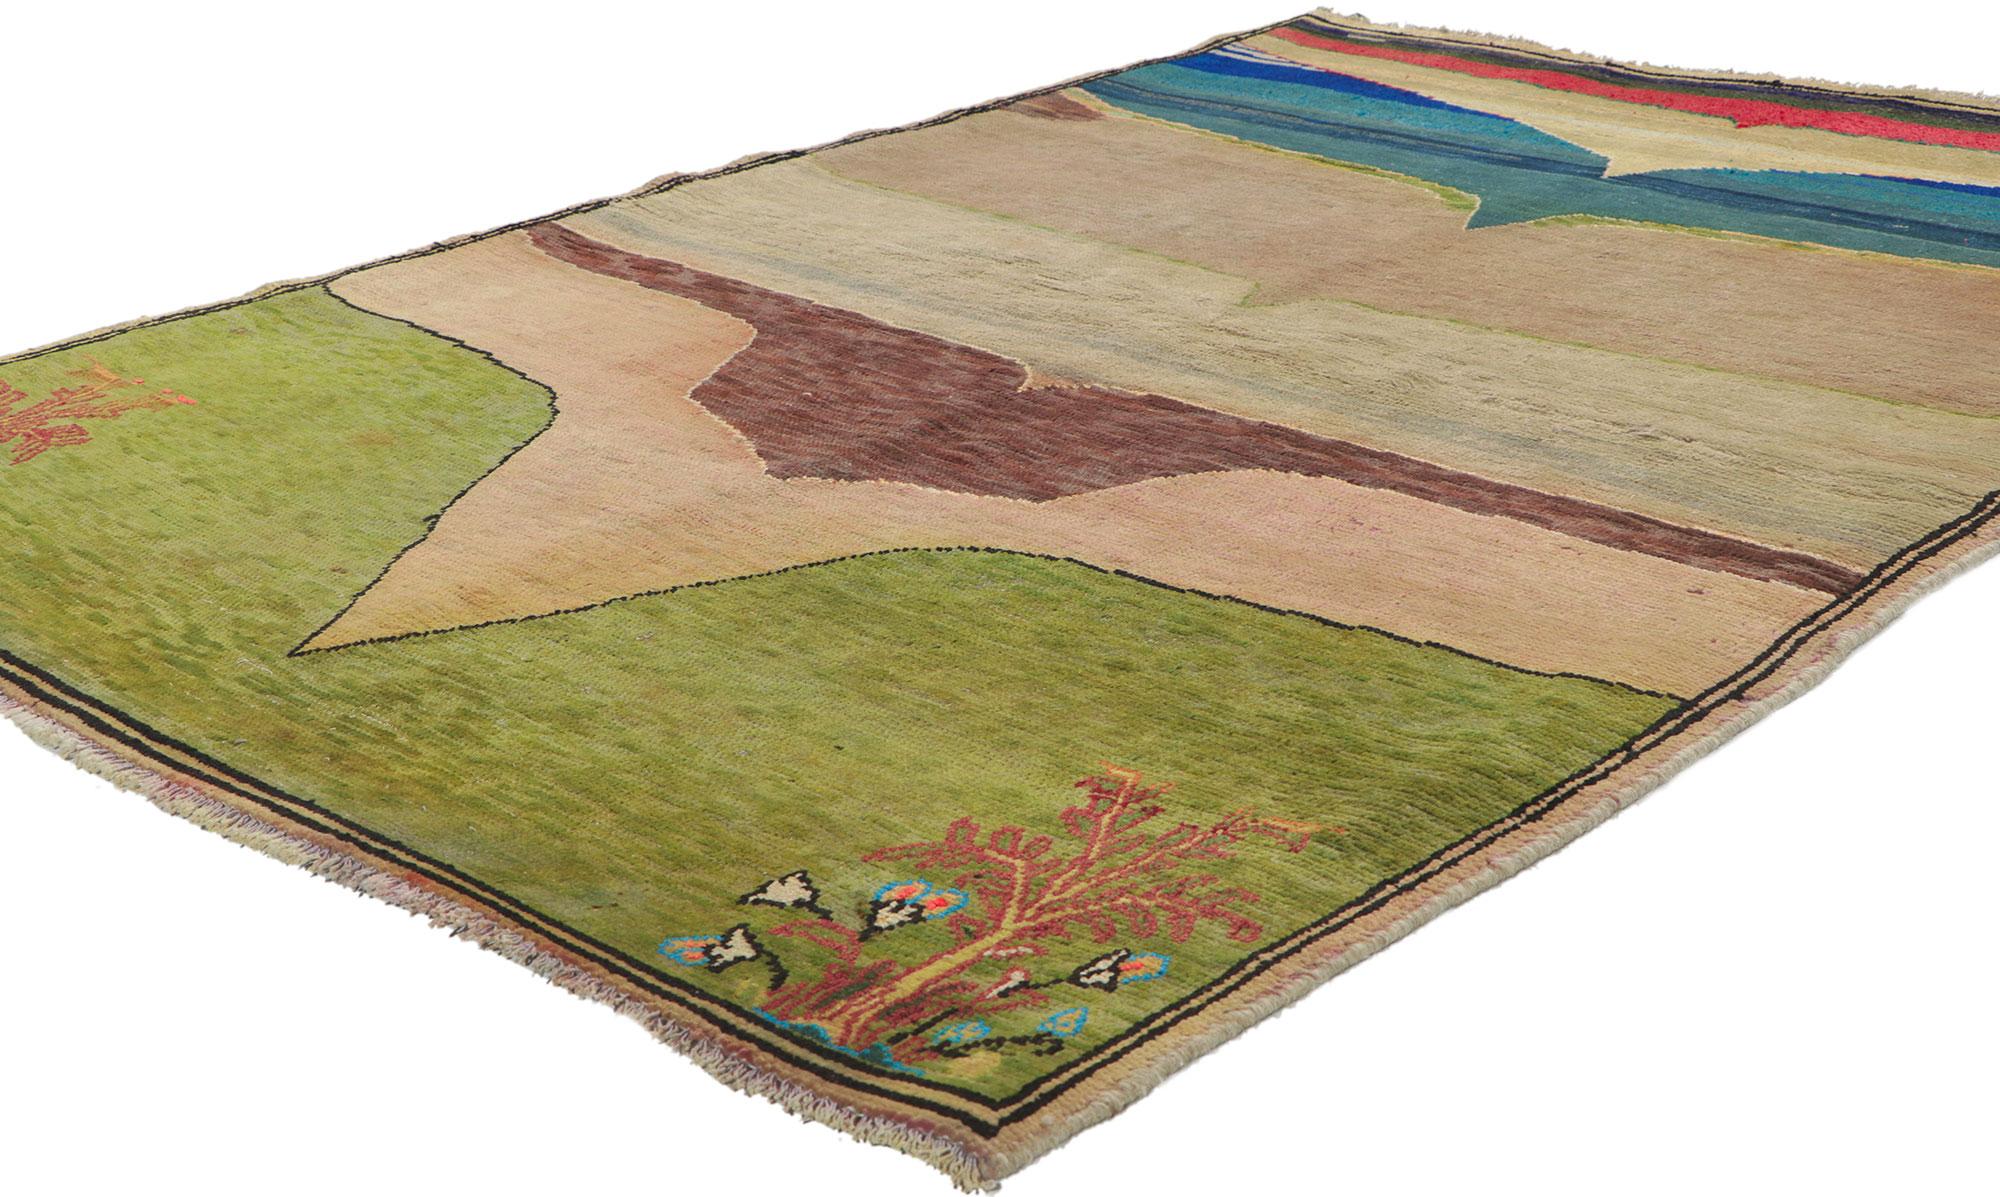 61073 vintage Persian landscape Gabbeh rug inspired by Helen Frankenthaler 04'01 x 06'00. Showcasing a landscape scene and an geological structural V-design, this hand knotted wool vintage Persian Gabbeh rug is a captivating vision of woven beauty.